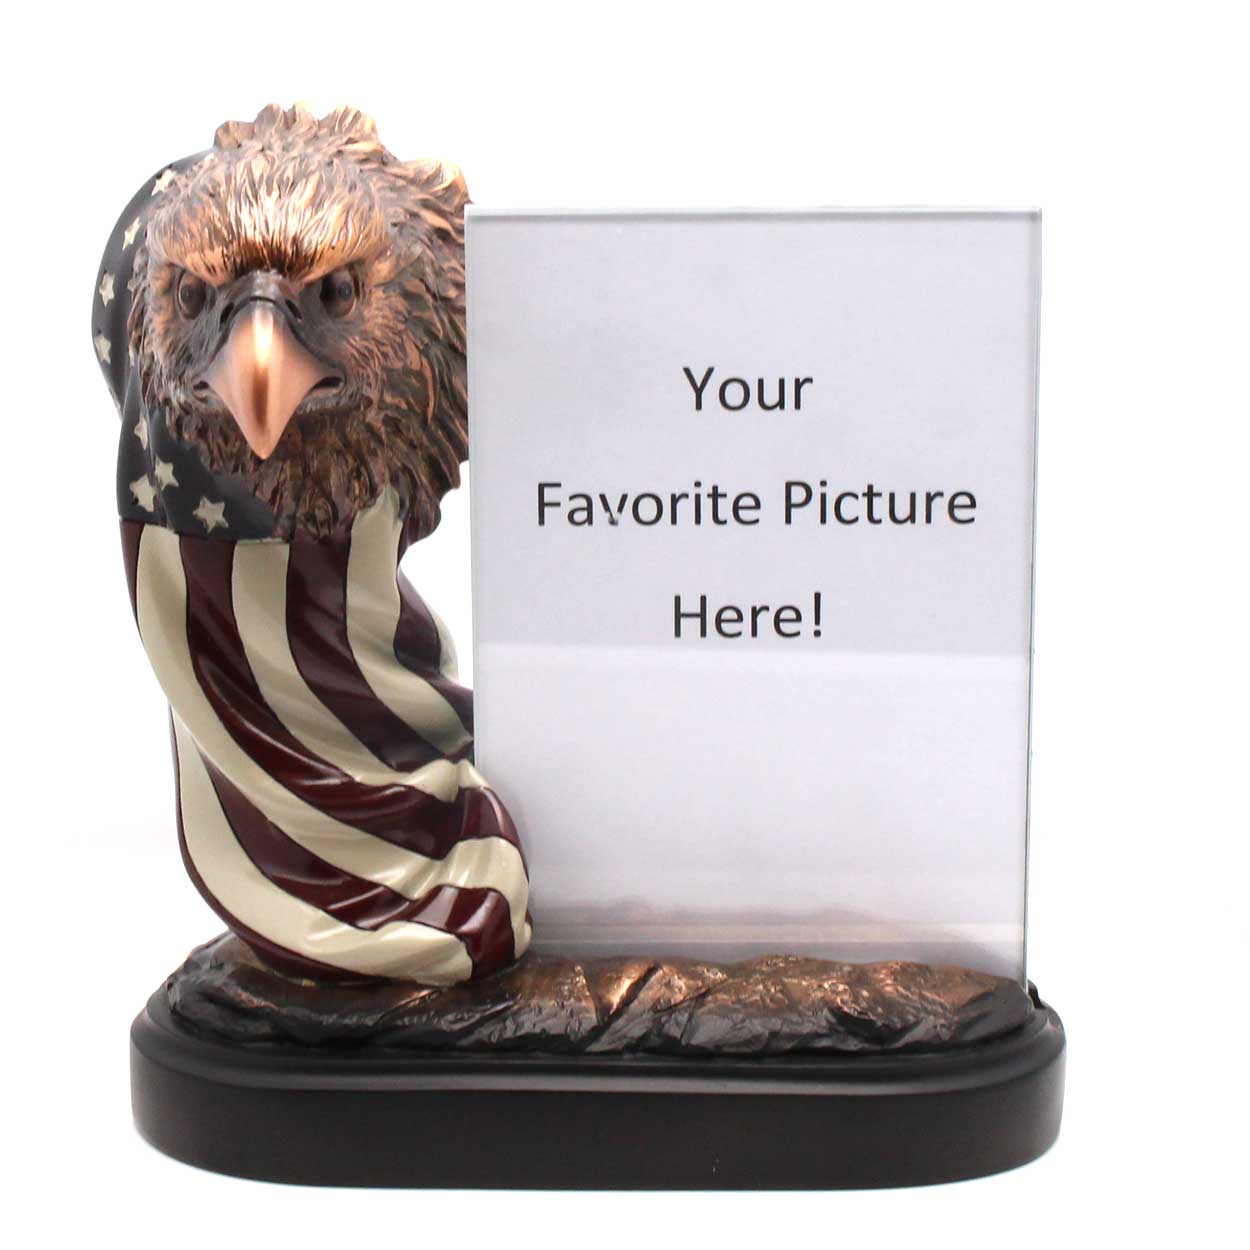 Eagle wrapped in Old Glory Picture Frame